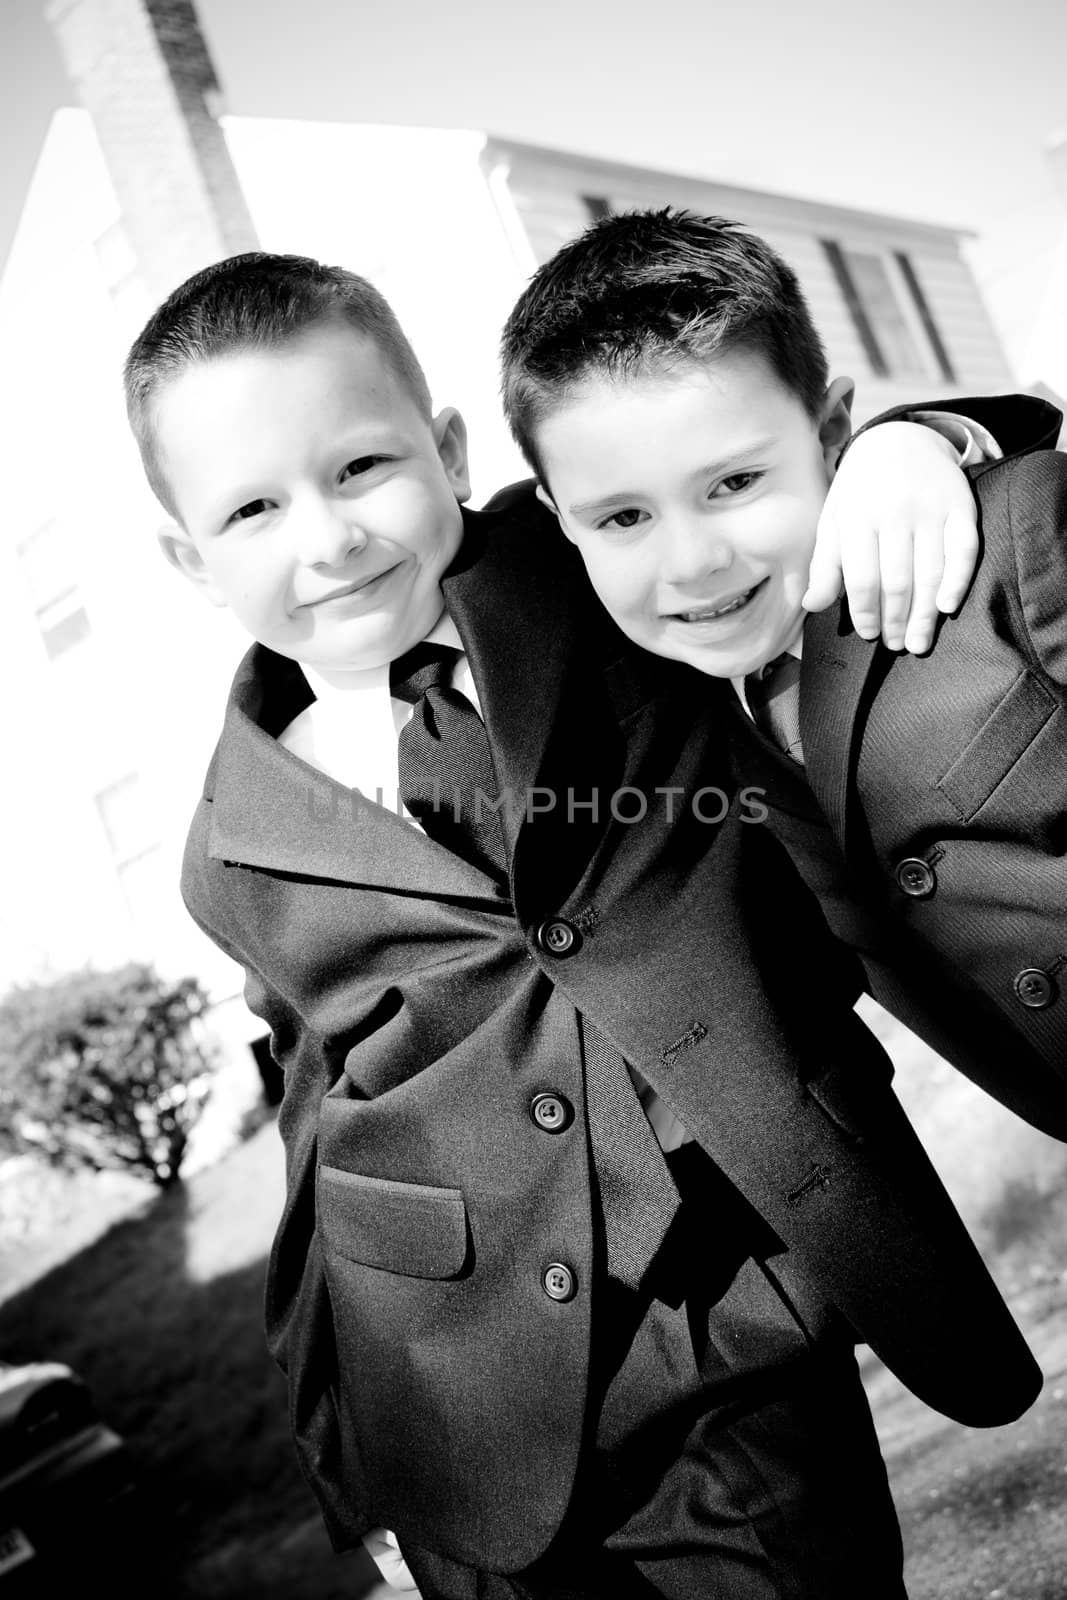 Two Happy Young Boys by graficallyminded